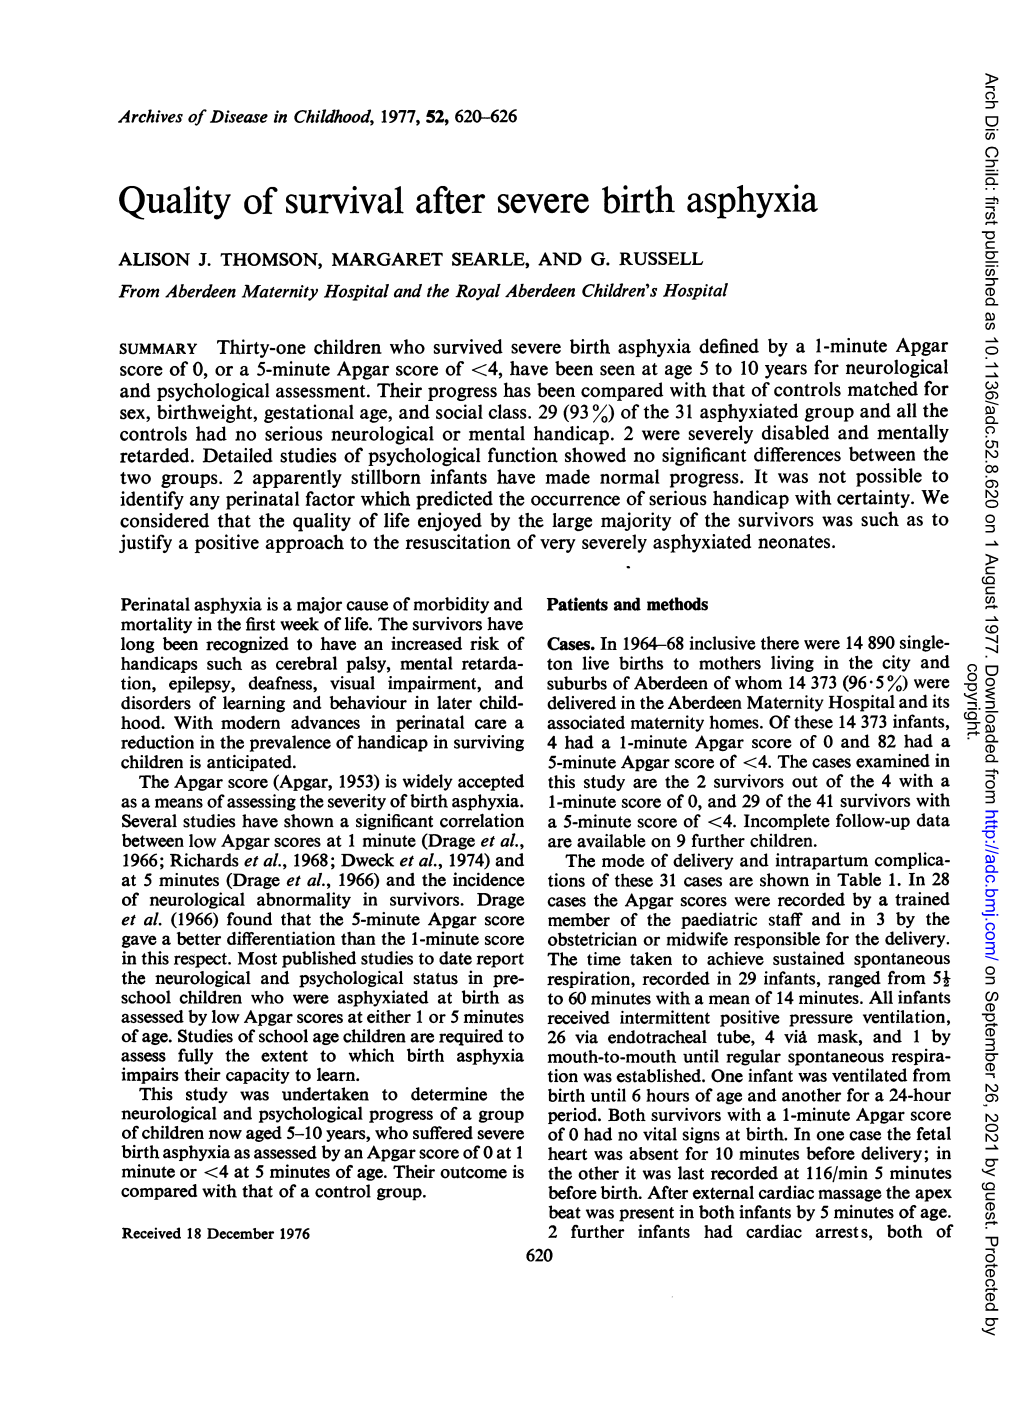 Quality of Survival After Severe Birth Asphyxia